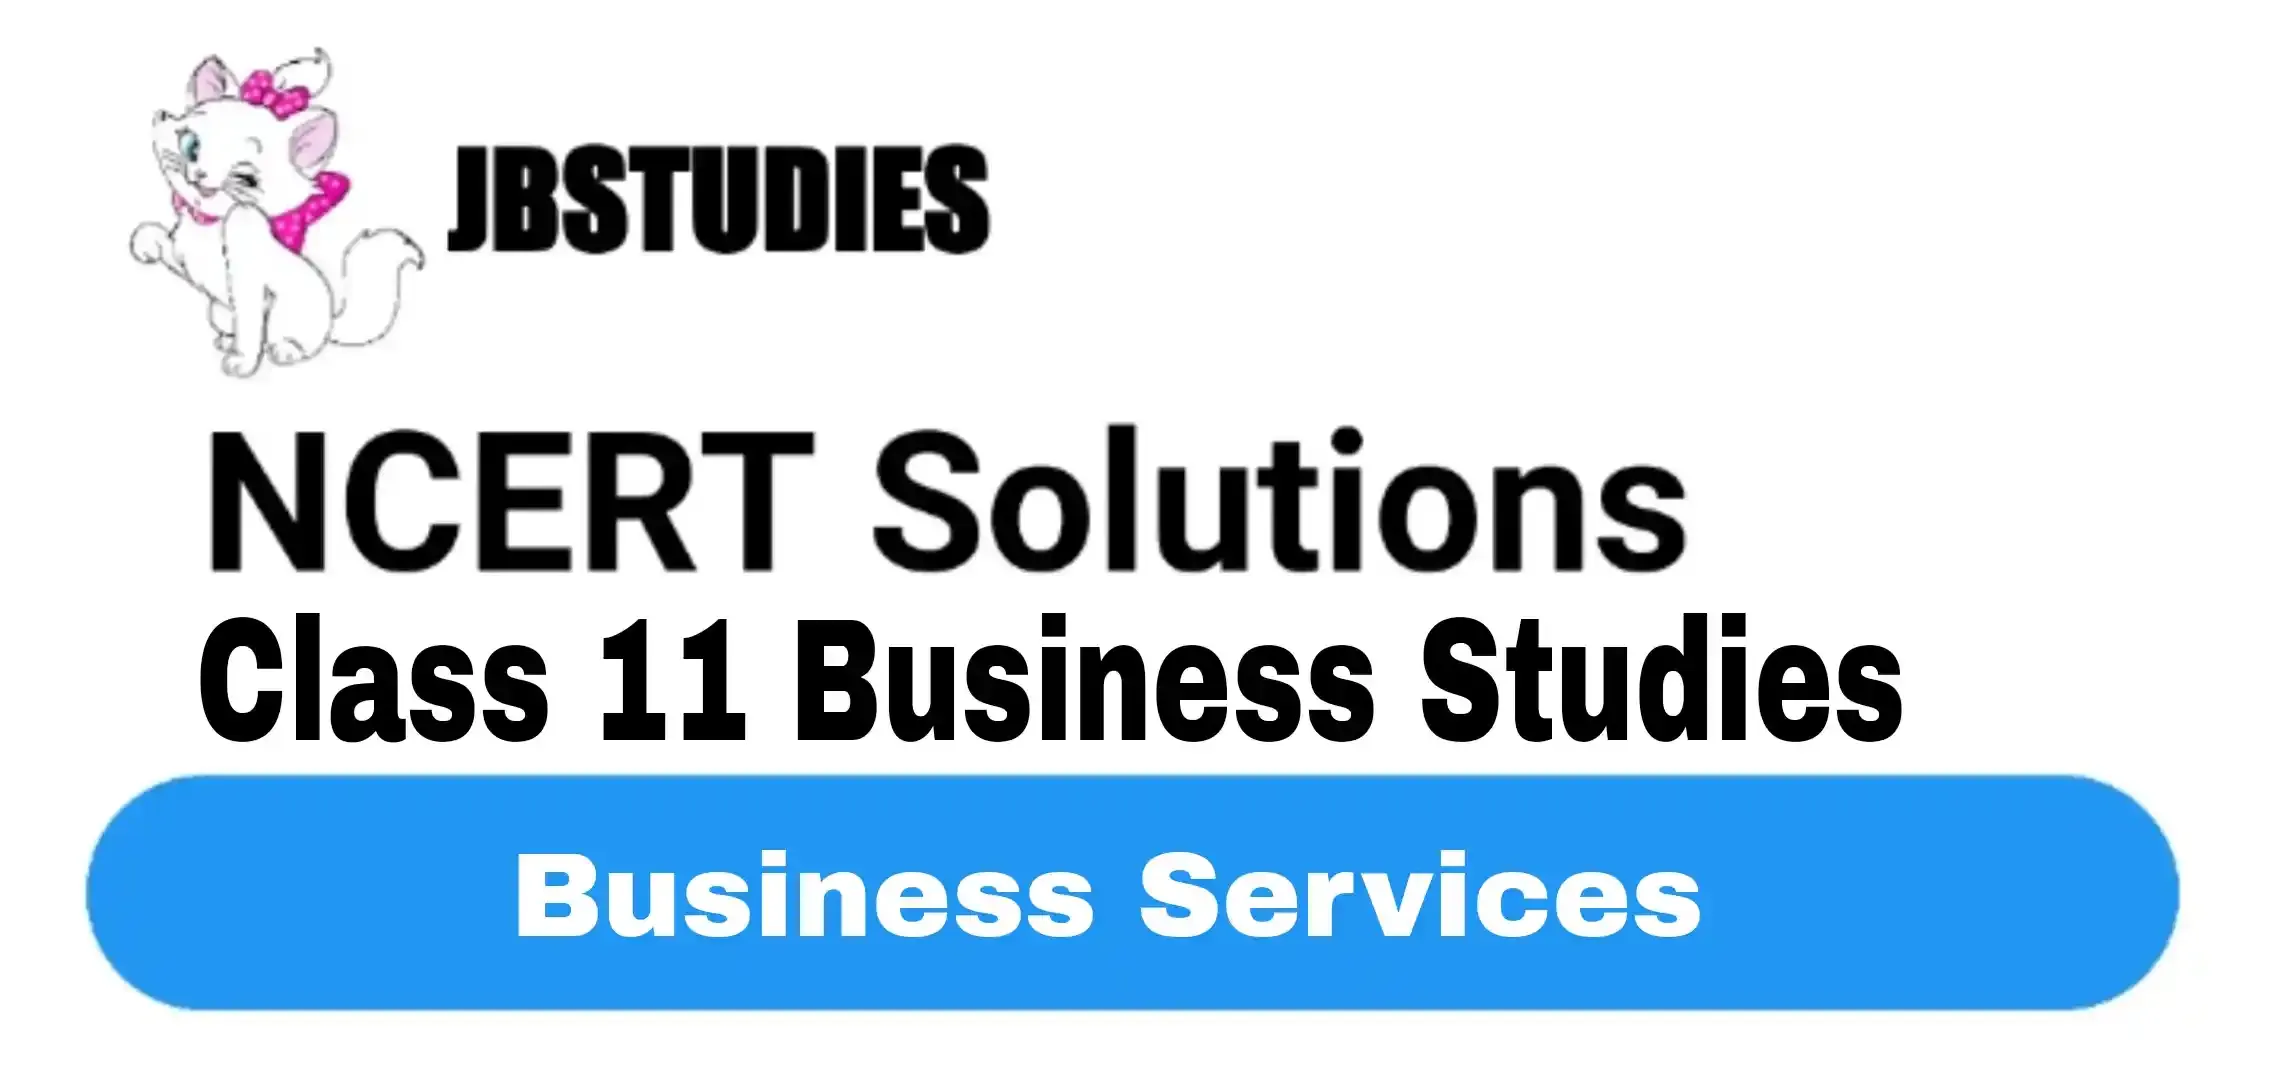 Solutions Class 11 Business Studies Chapter -4 (Business Services)